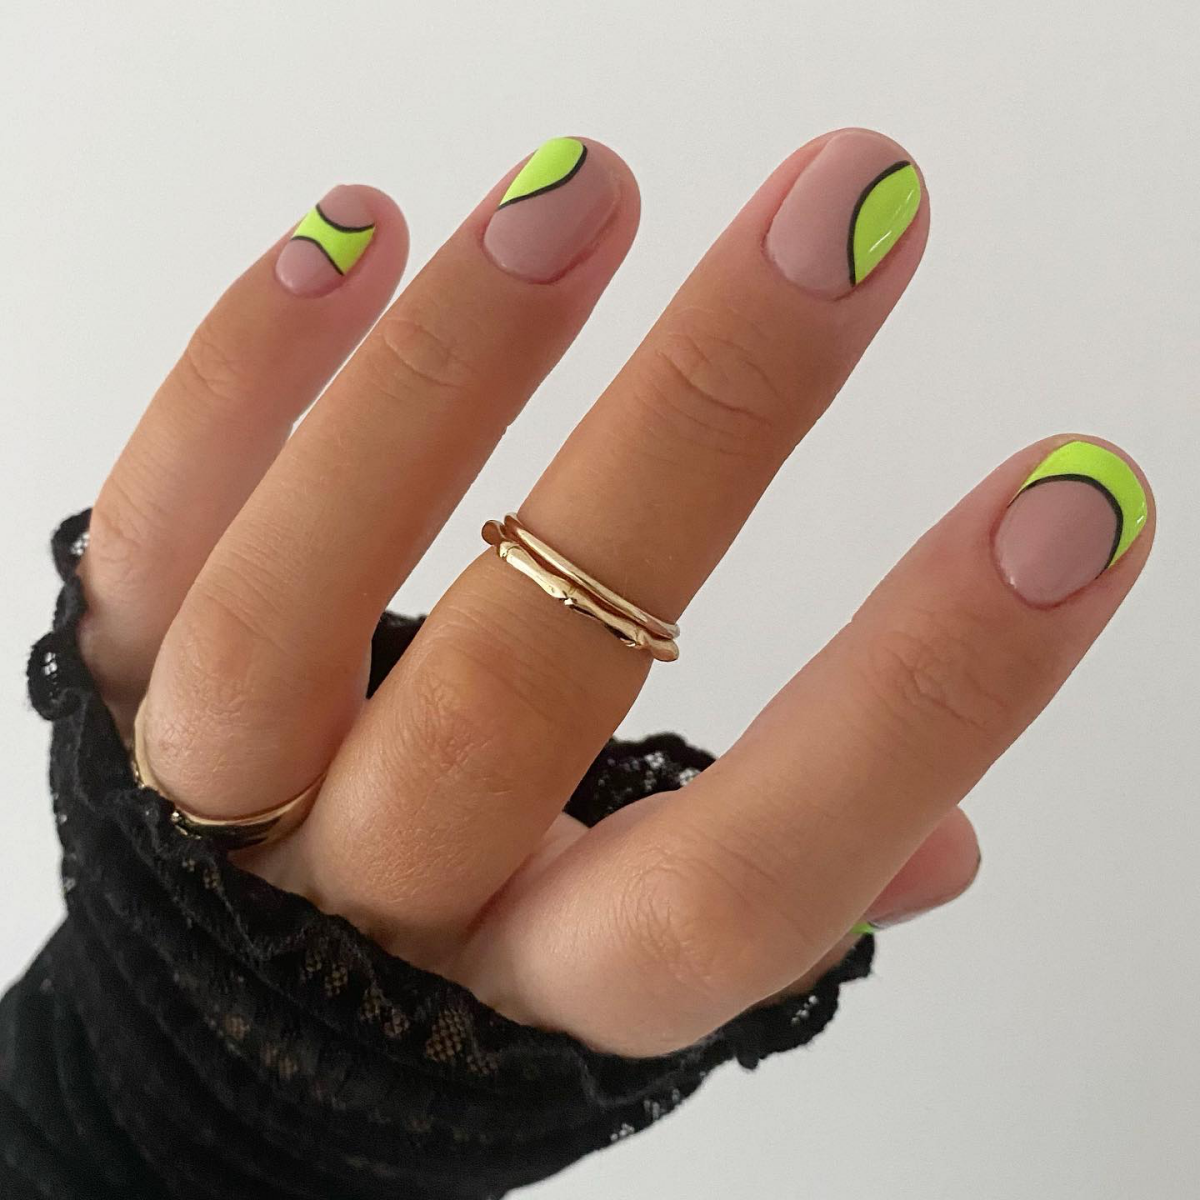 lime green nails design